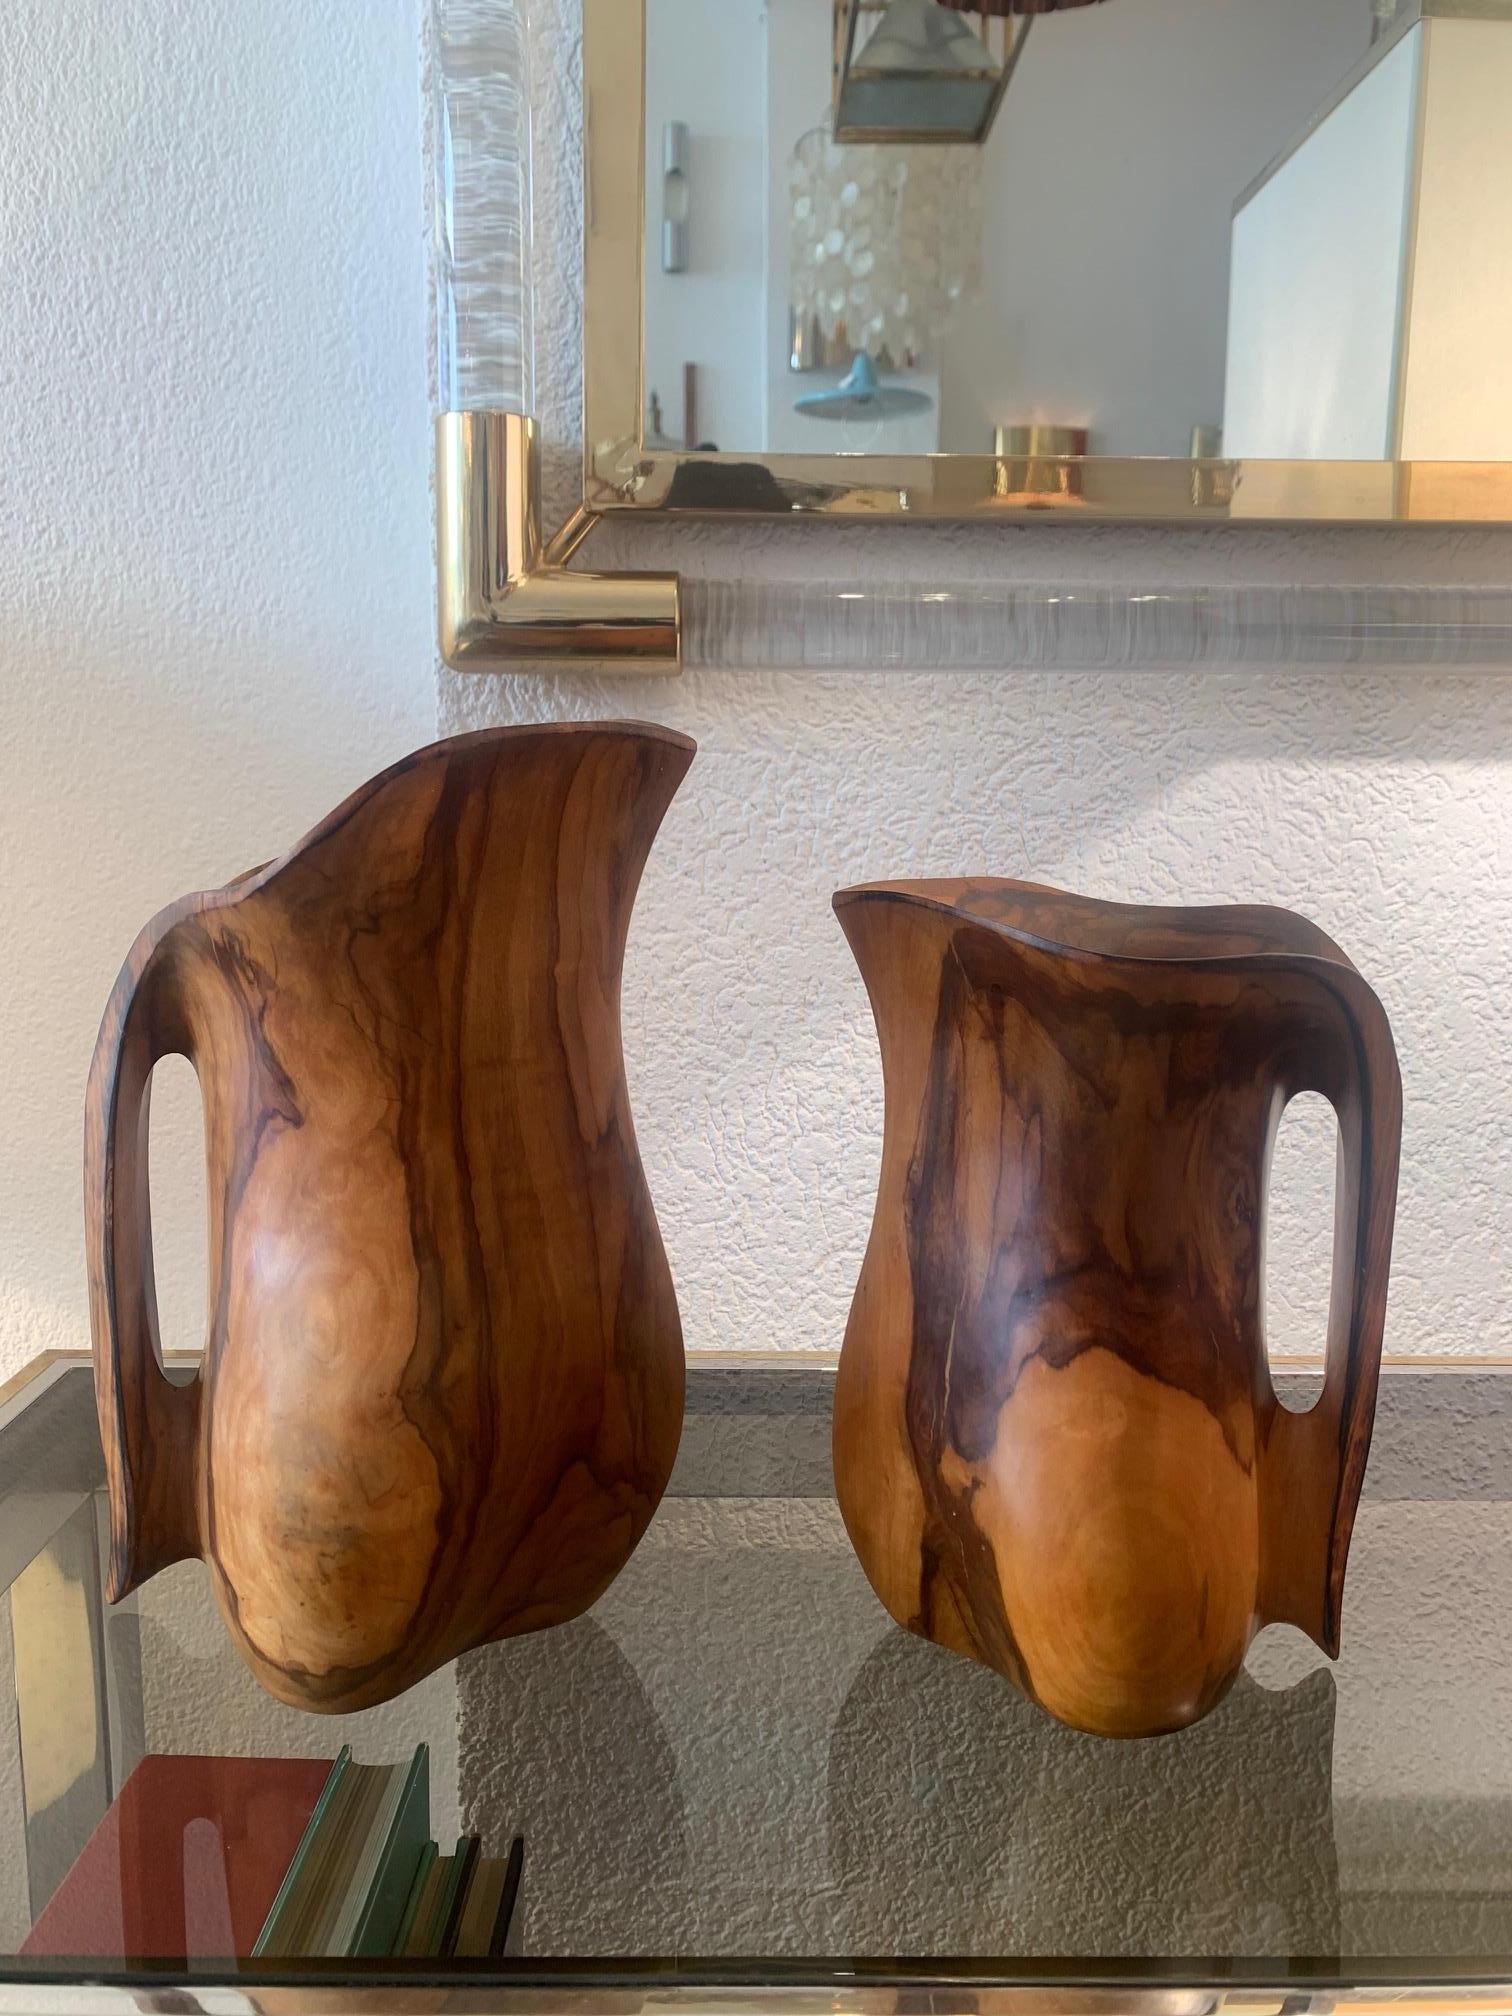 Set of 2 sculptural carved olivewood water jug, France ca. 1960s
Attributed or in the manner of Alexandre Noll
Good condition
1 x H 26 x L 18 x P 15 cm
1 x H 22 x L 15 x P 13 cm.